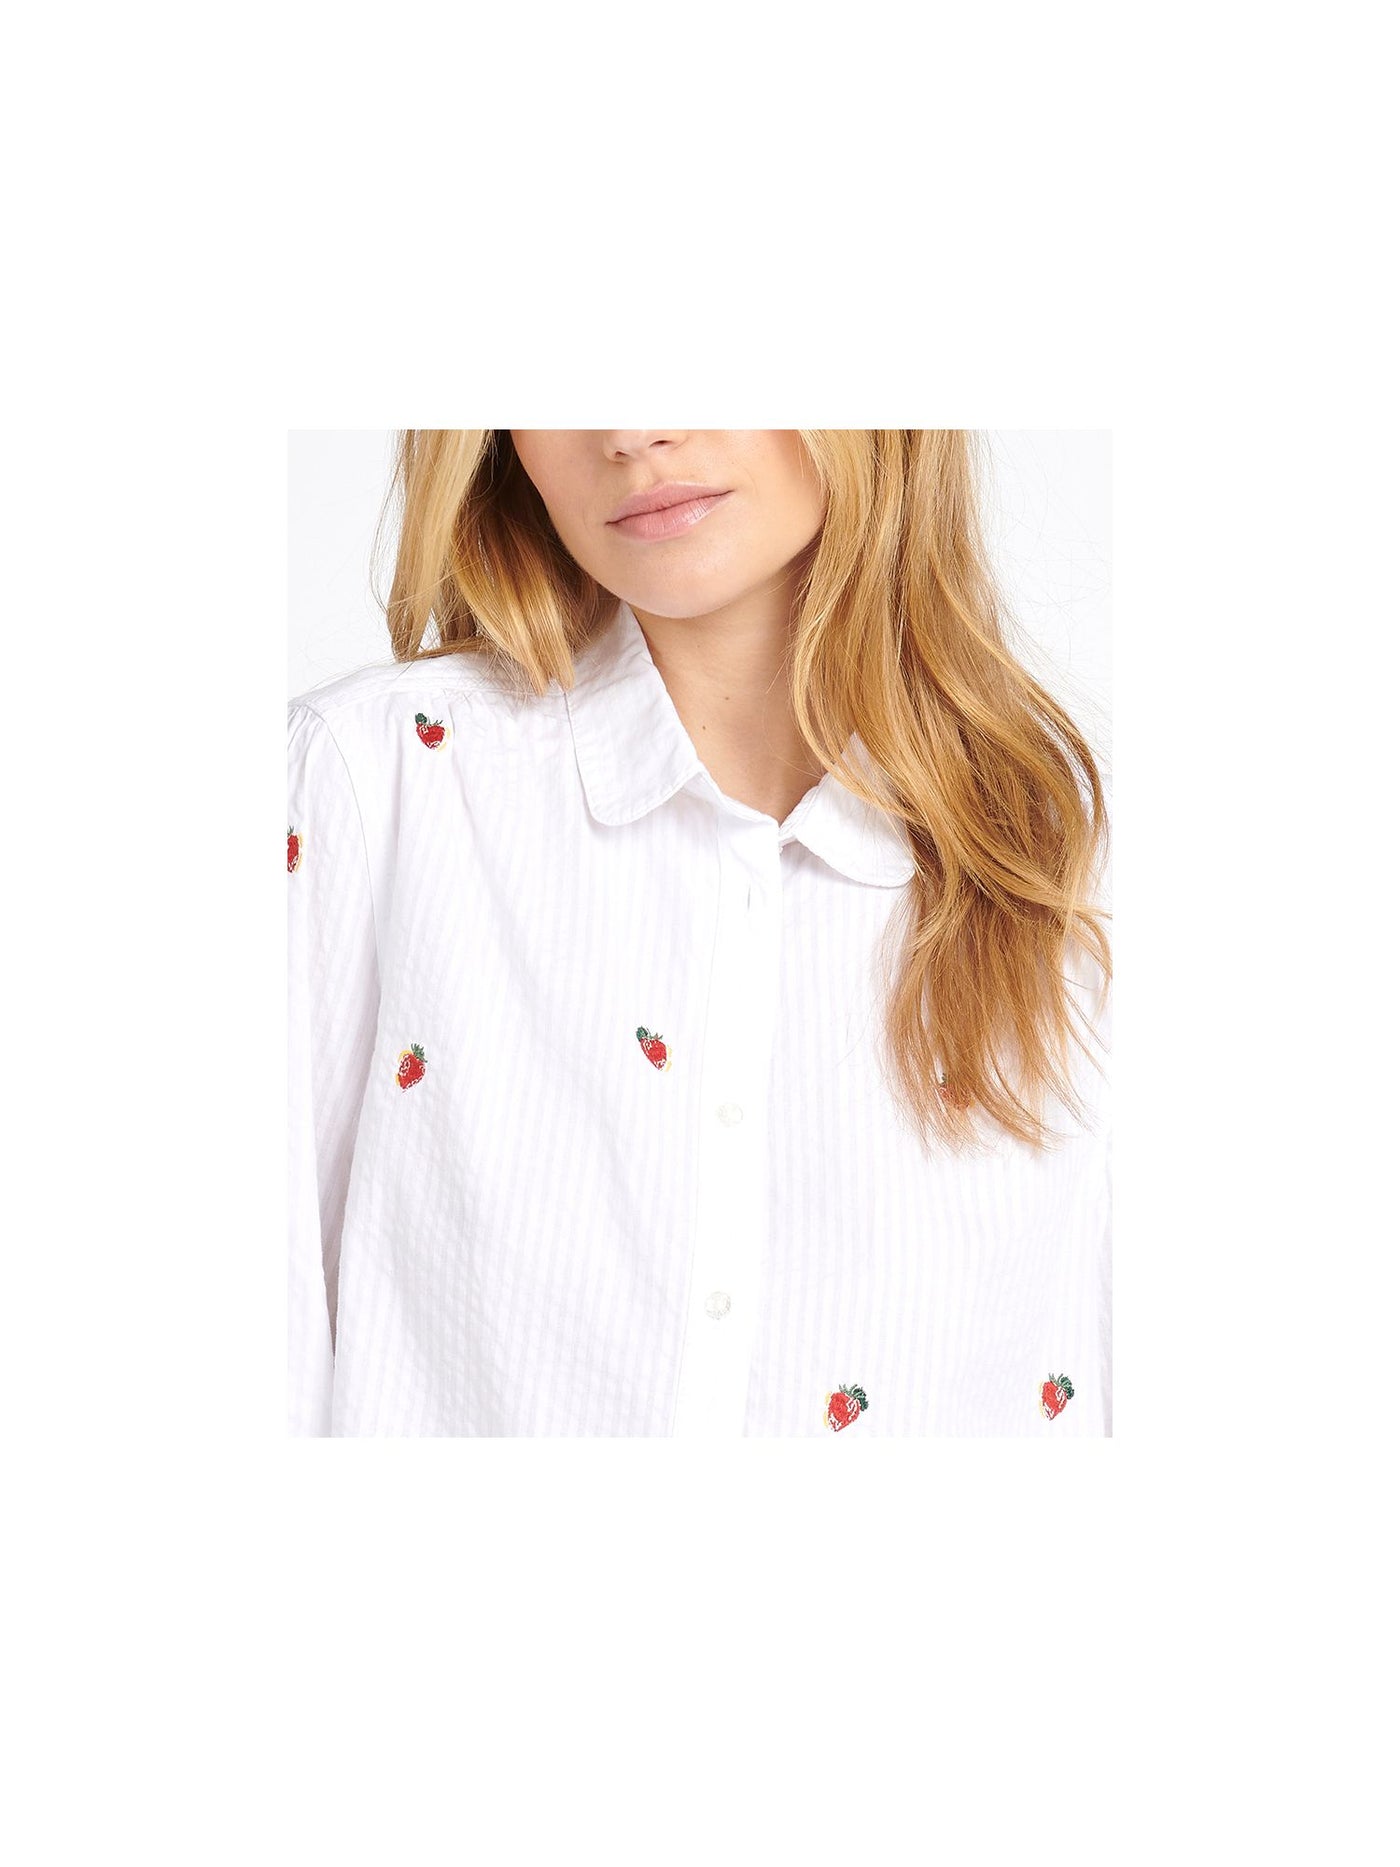 BARBOUR Womens White Textured Embroidered Cuffed Curved Hem Slitted Striped 3/4 Sleeve Collared Button Up Top 6